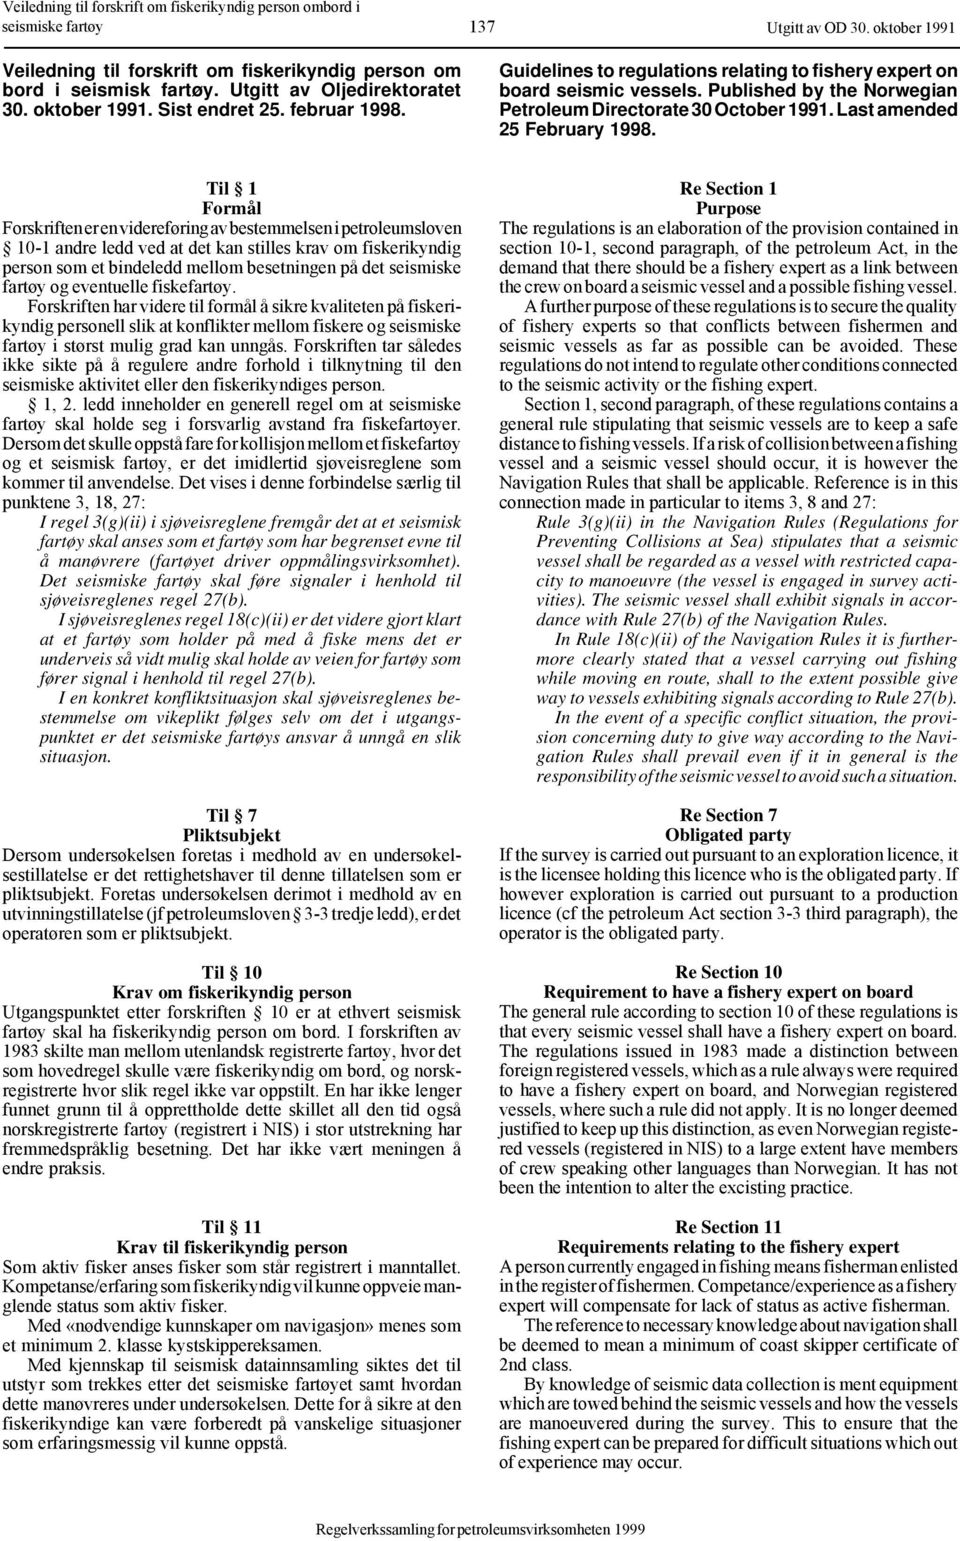 Guidelines to regulations relating to fishery expert on board seismic vessels. Published by the Norwegian Petroleum Directorate 30 October 1991. Last amended 25 February 1998.